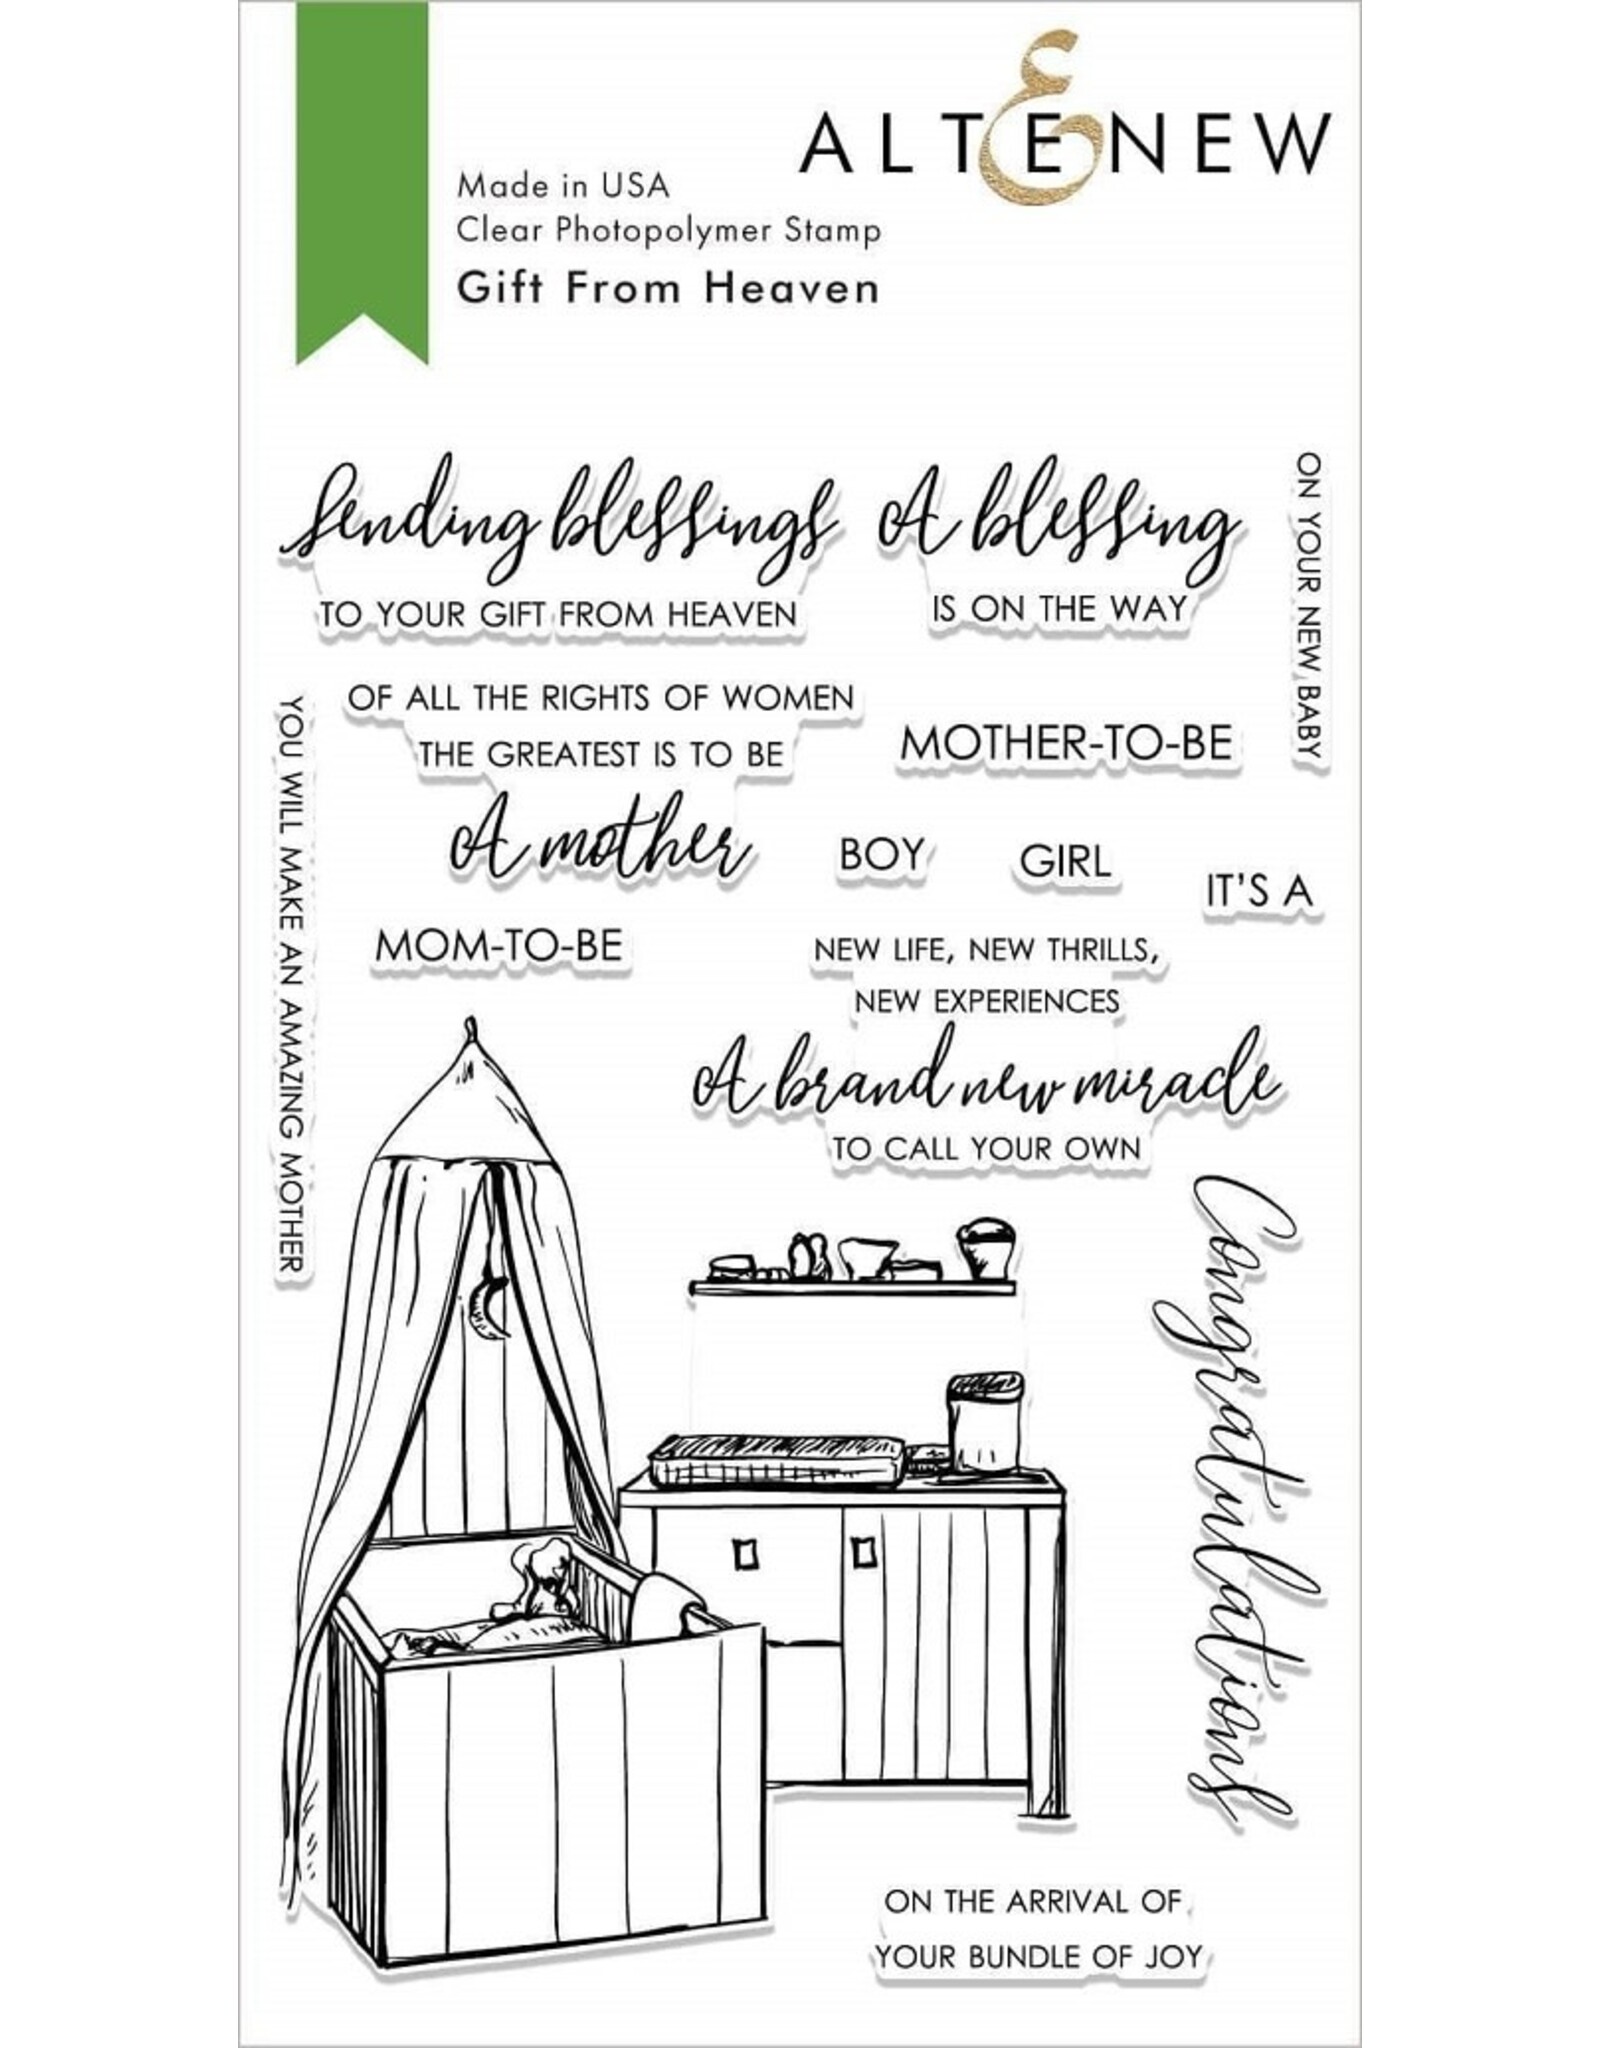 ALTENEW Gift From Heaven Stamp Set